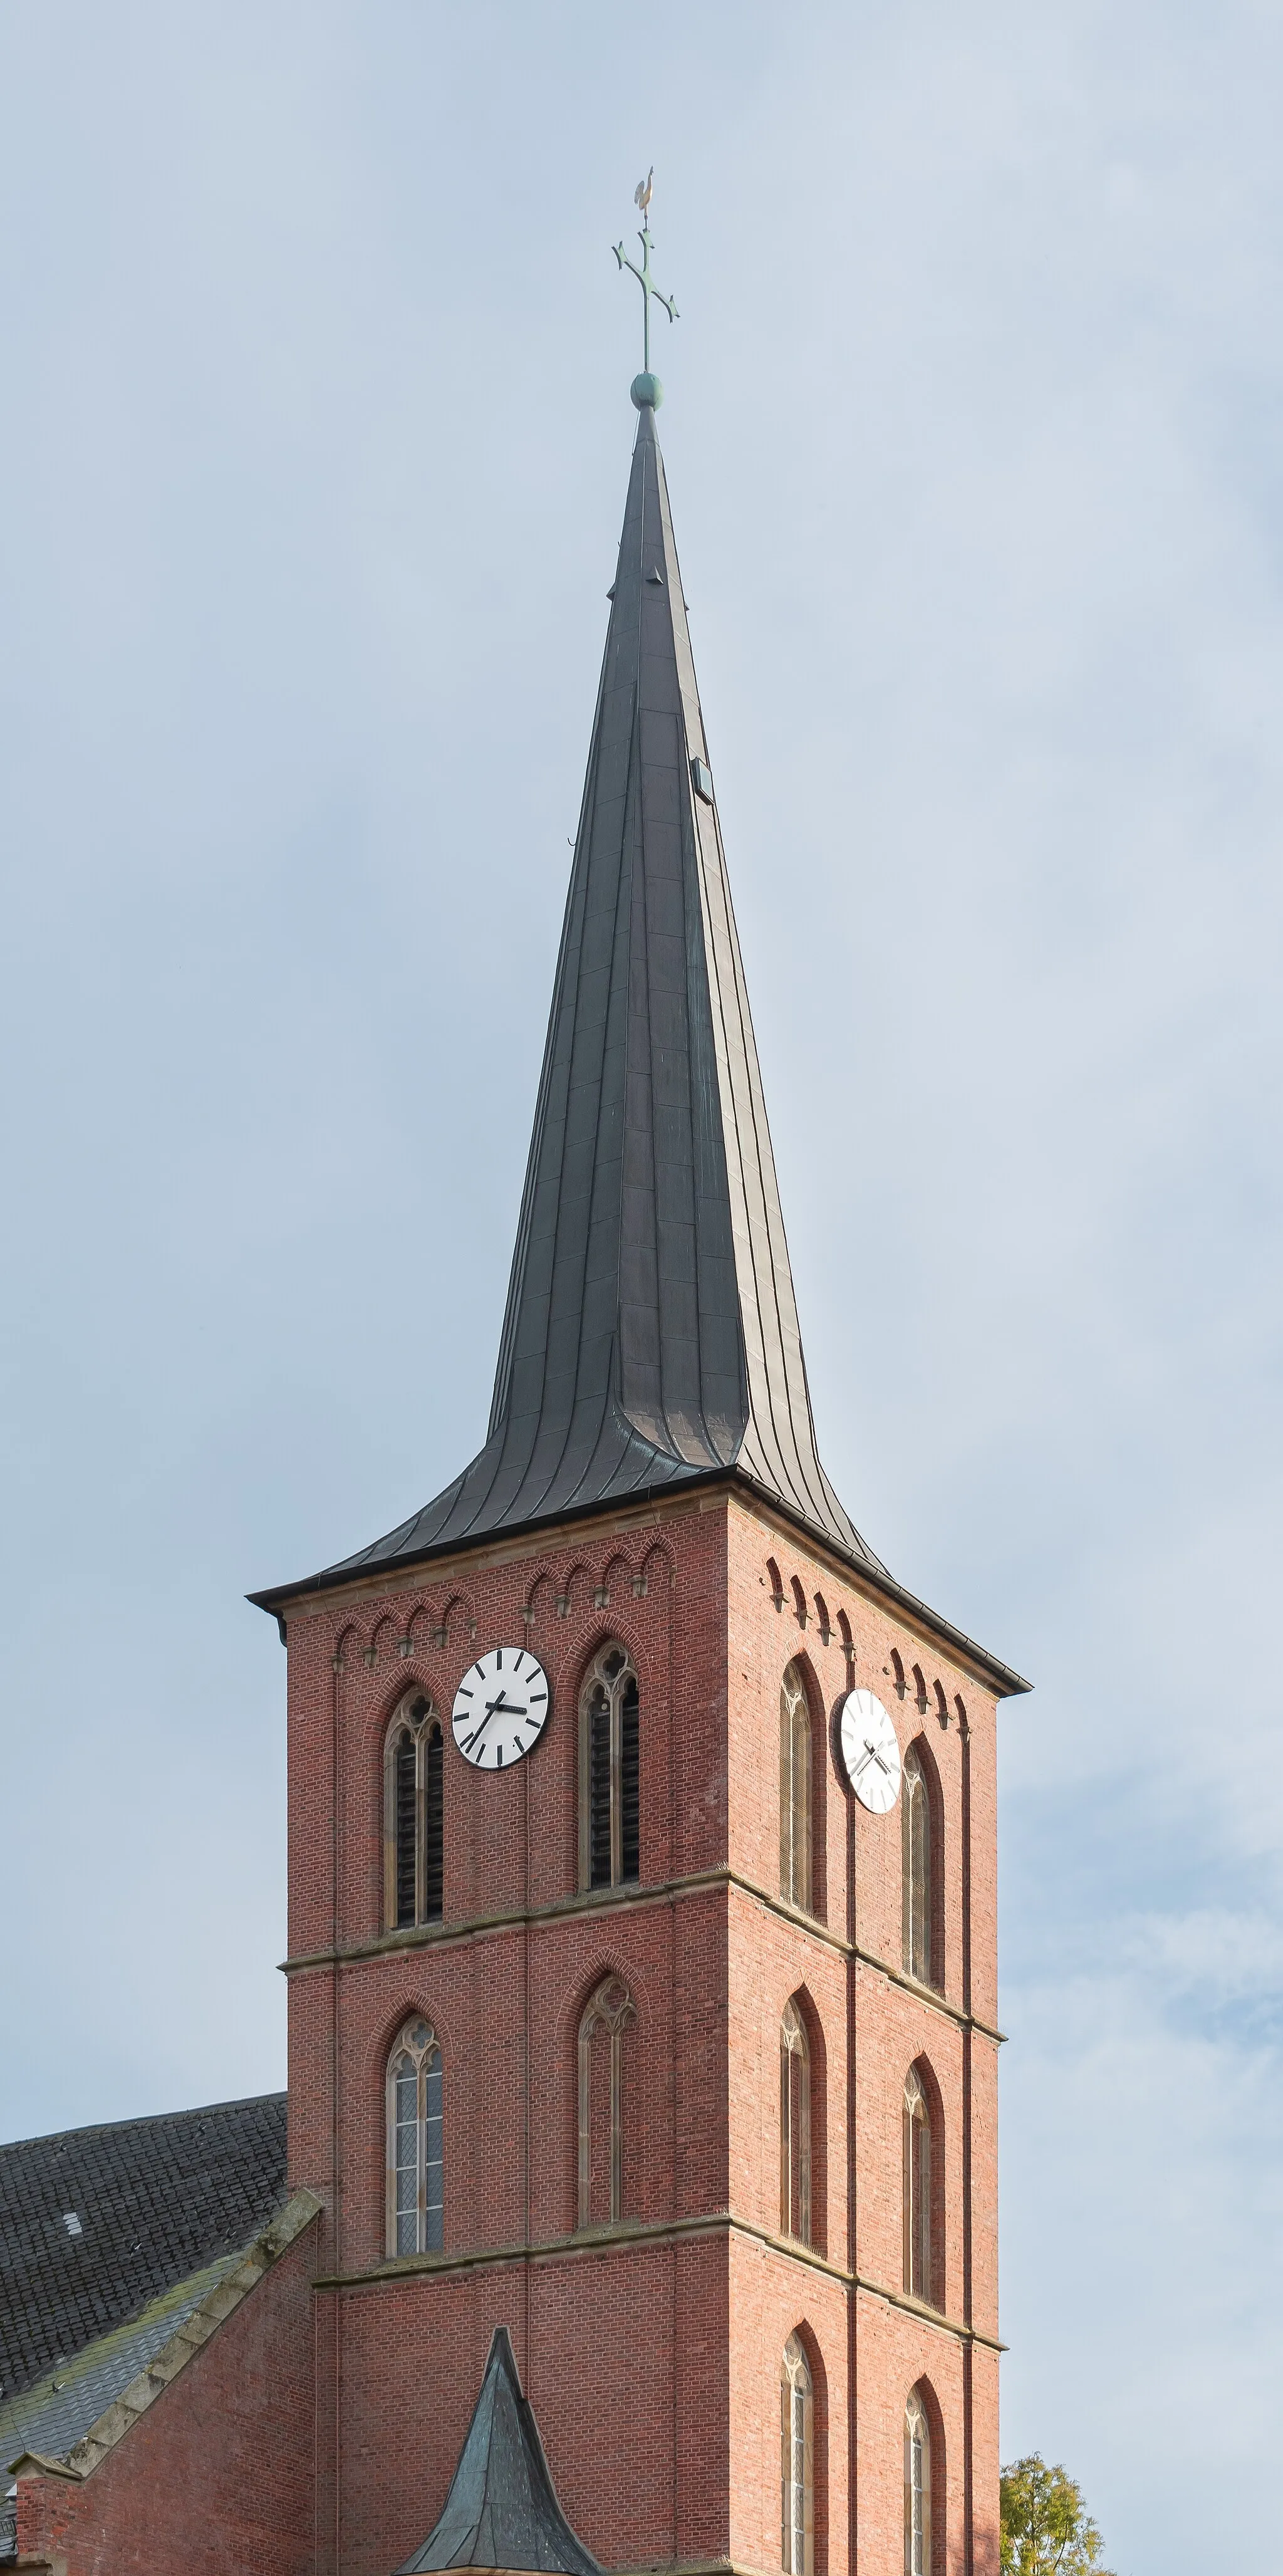 Photo showing: Bell tower of the Saint Peter church in Lastrup, Lower Saxony, Germany